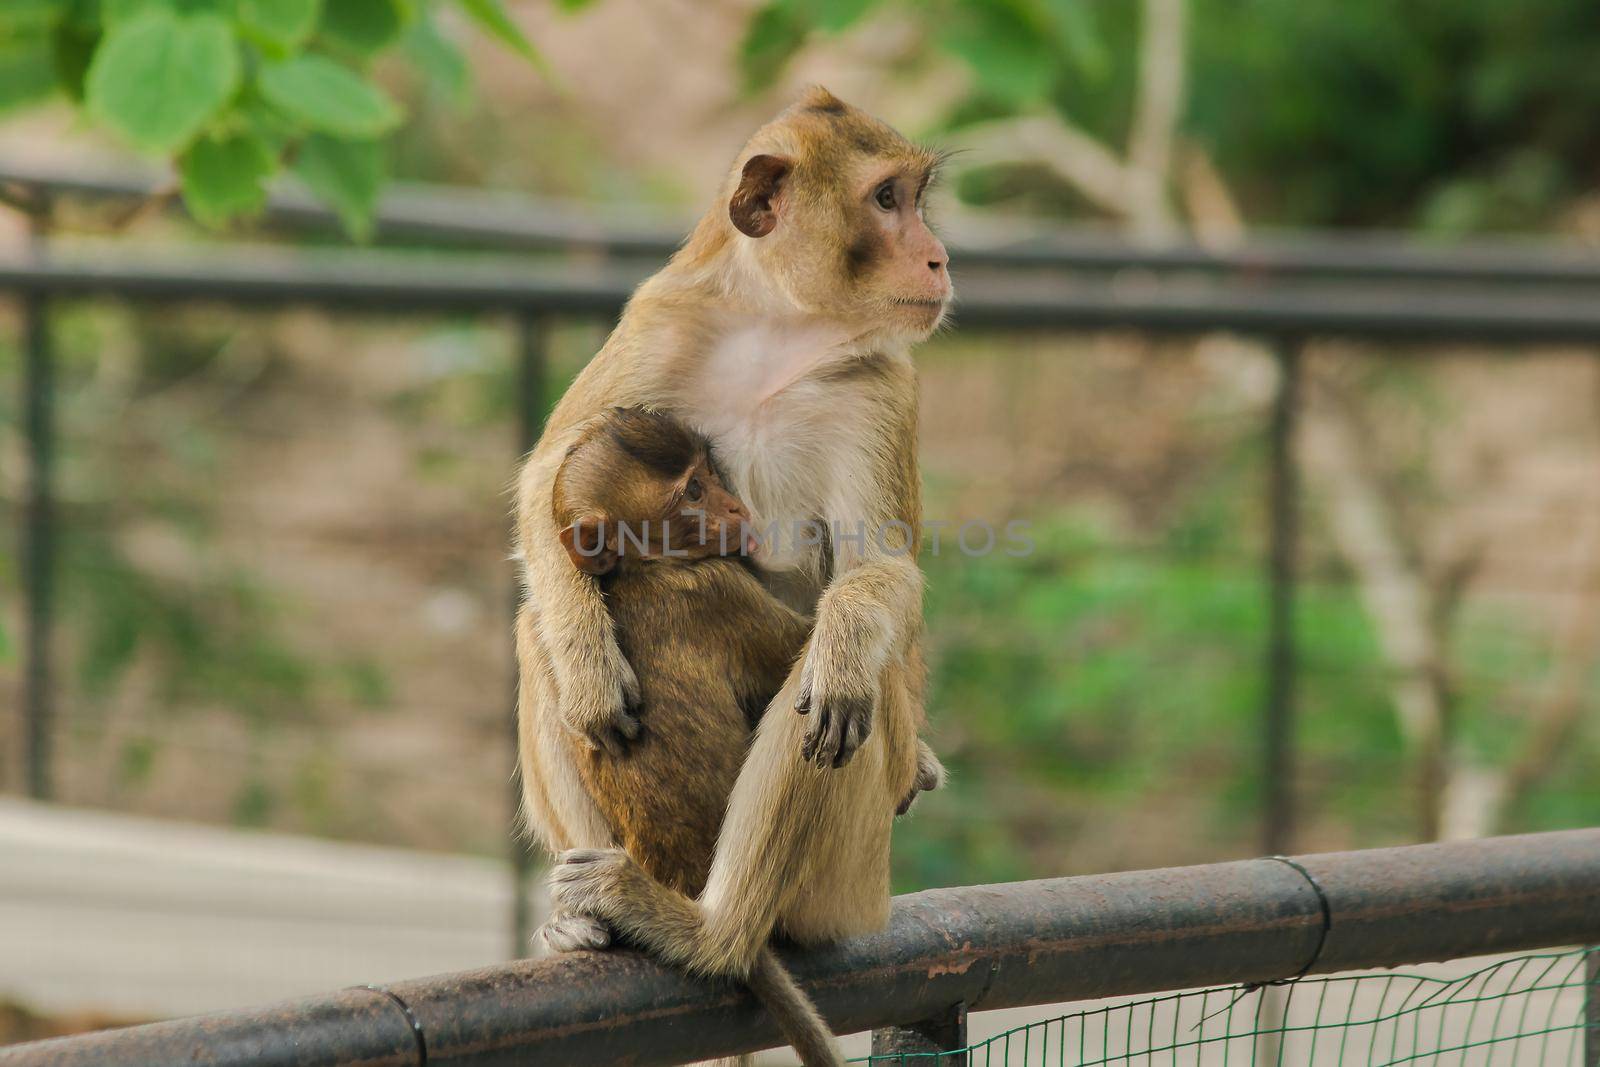 The baby monkeys feed on the milk from the sitting mother. by Puripatt